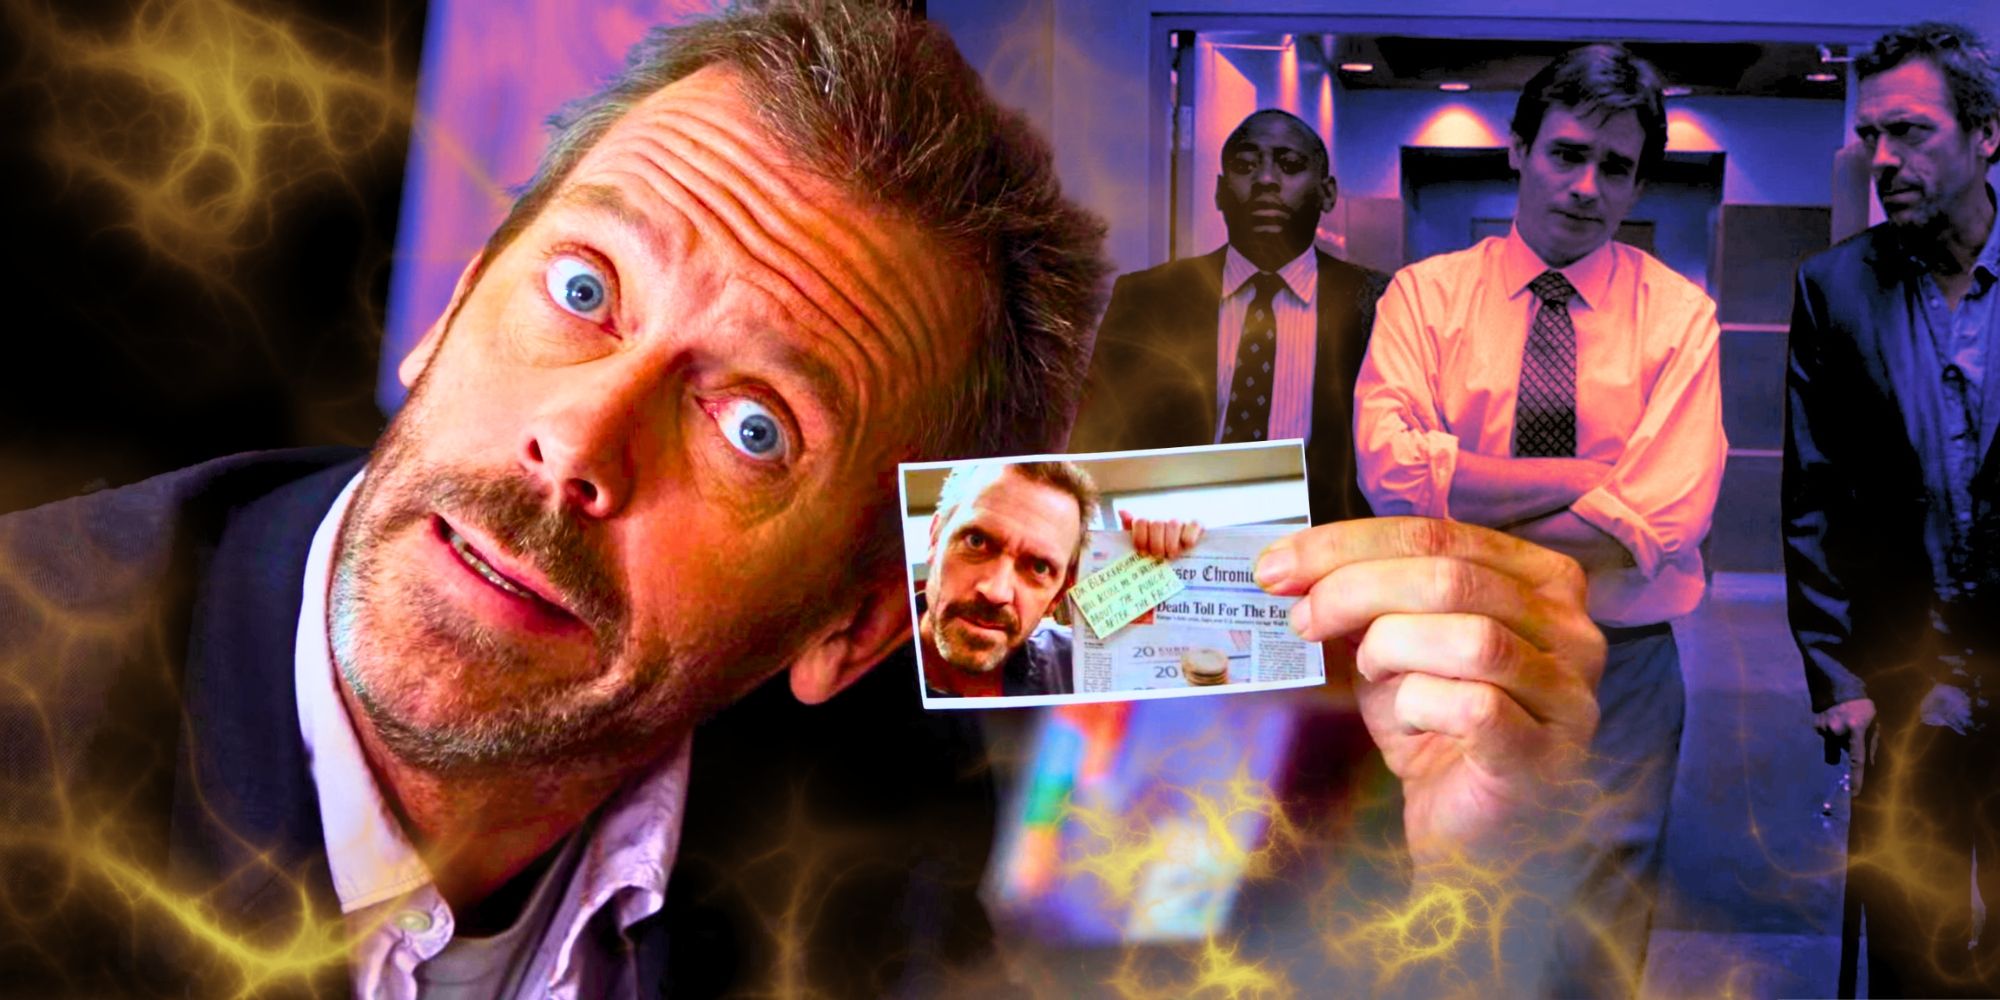 Custom image featuring House, Foreman, and Wilson